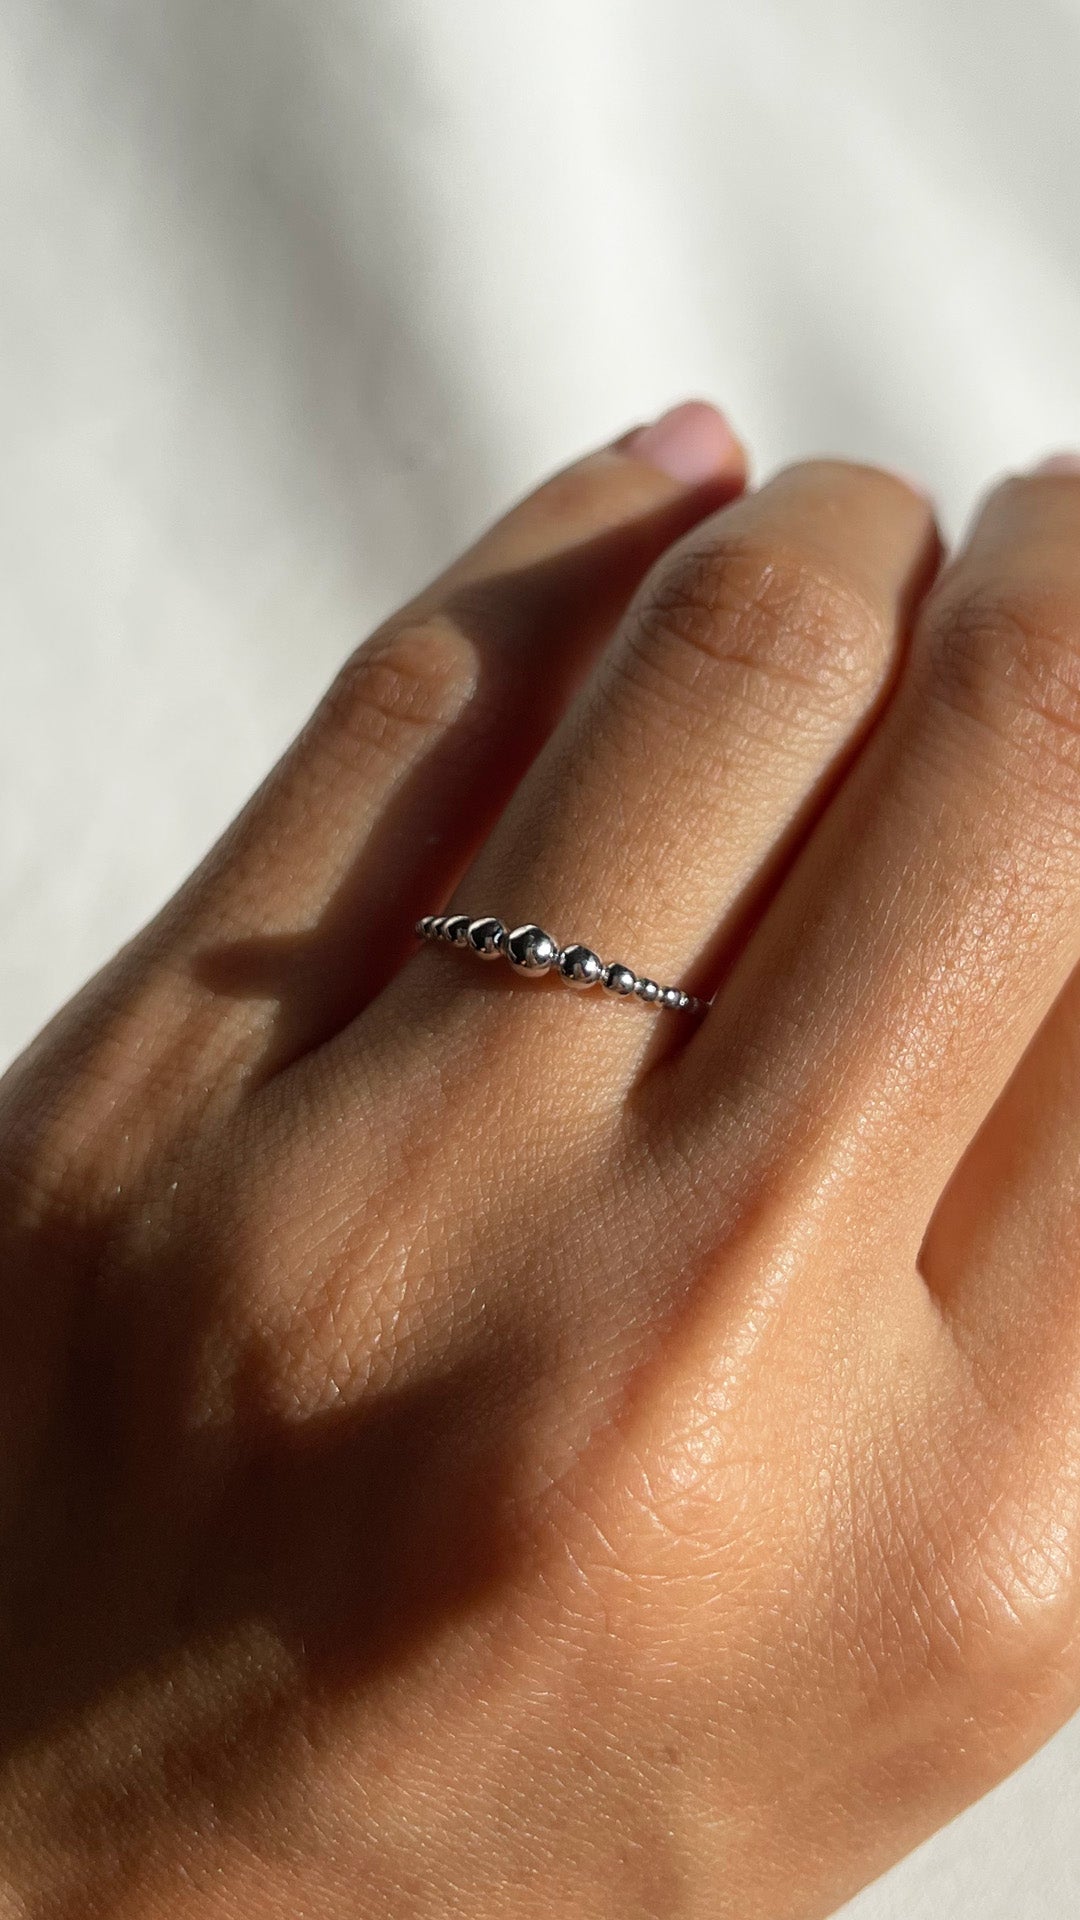 Cady Bead Ring Silver